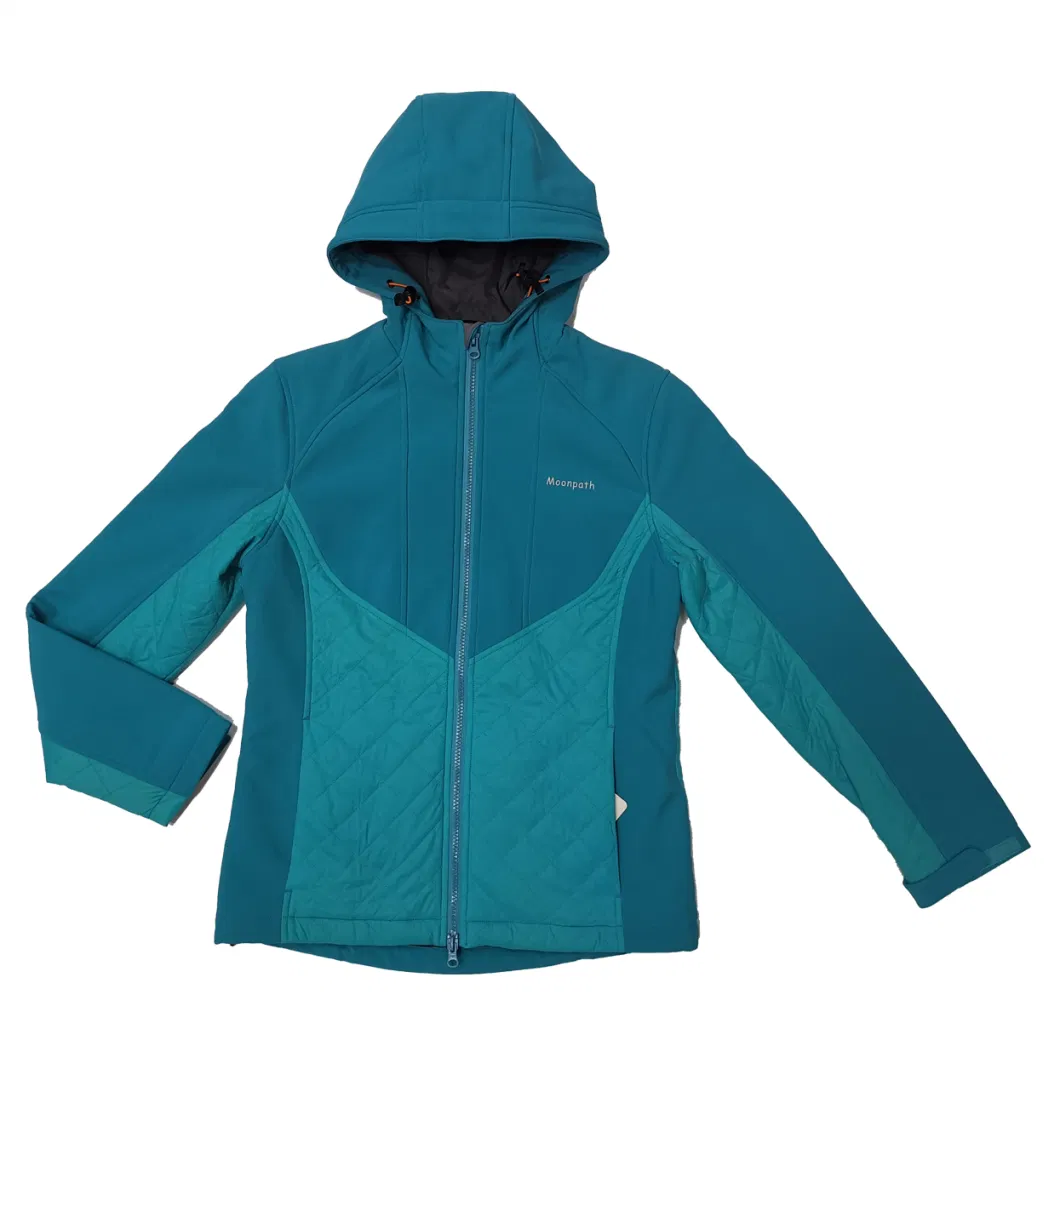 Outdoor Jacket Products Soft Shell Jackets Waterproof Softshell Team Jacket